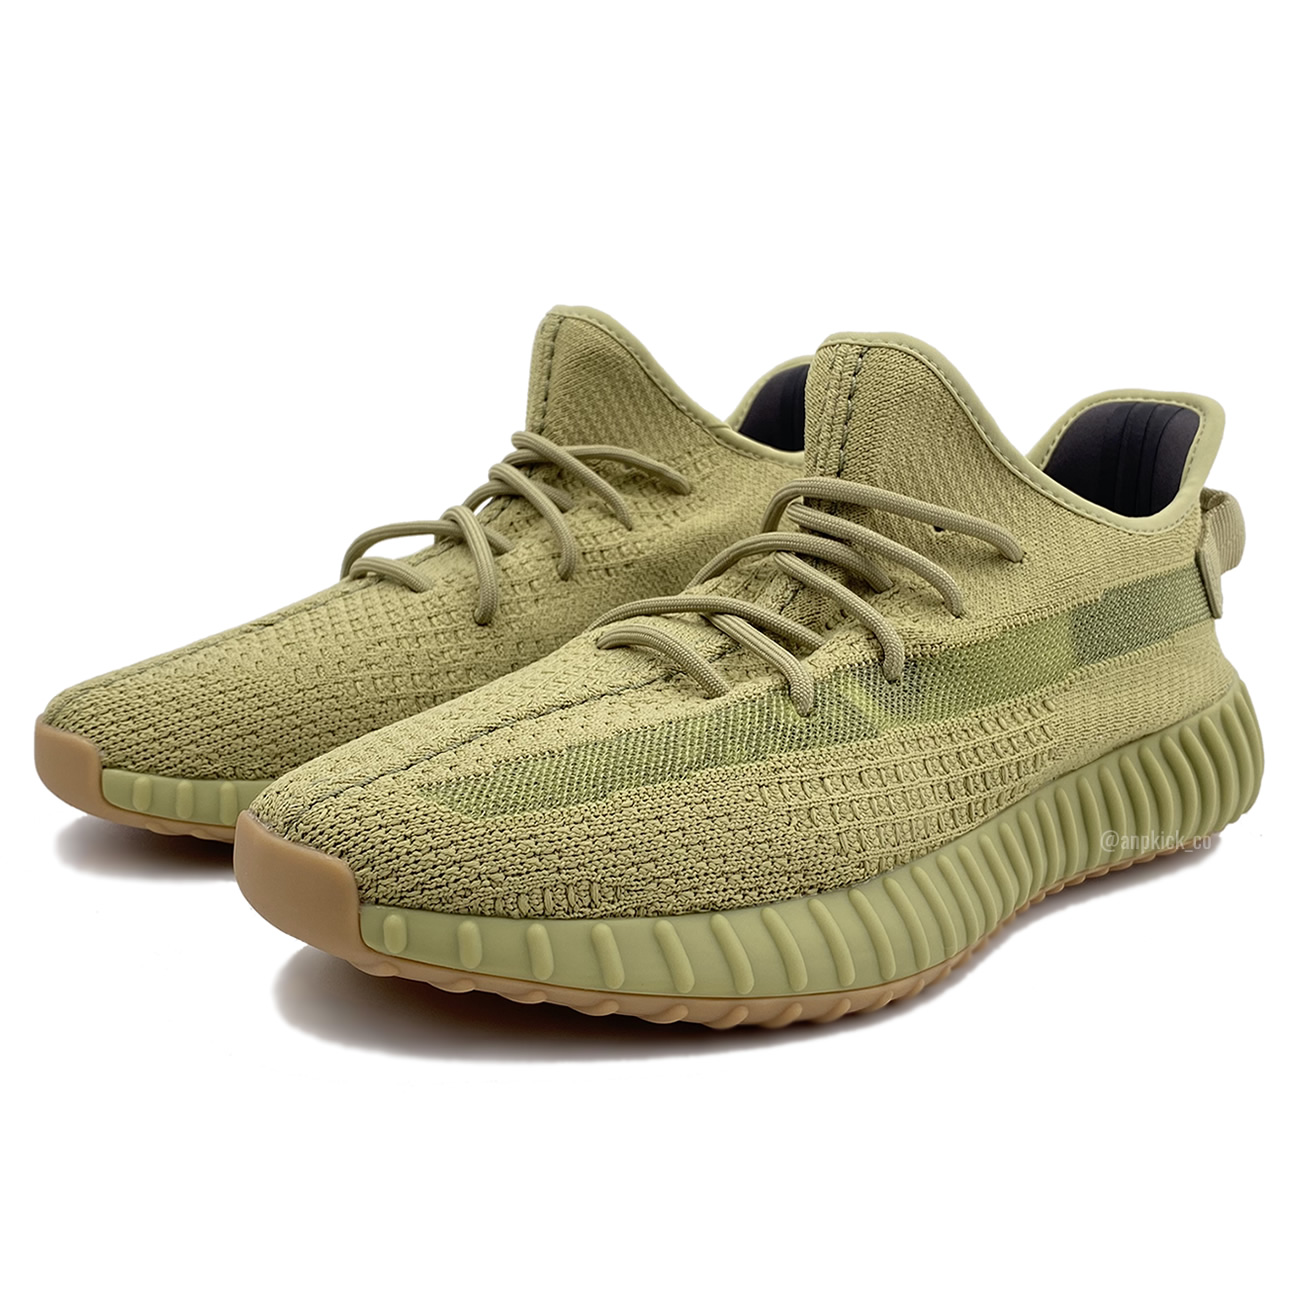 adidas Yeezy Boost 350 V2 "Sulfur" FY5346 New Release Date